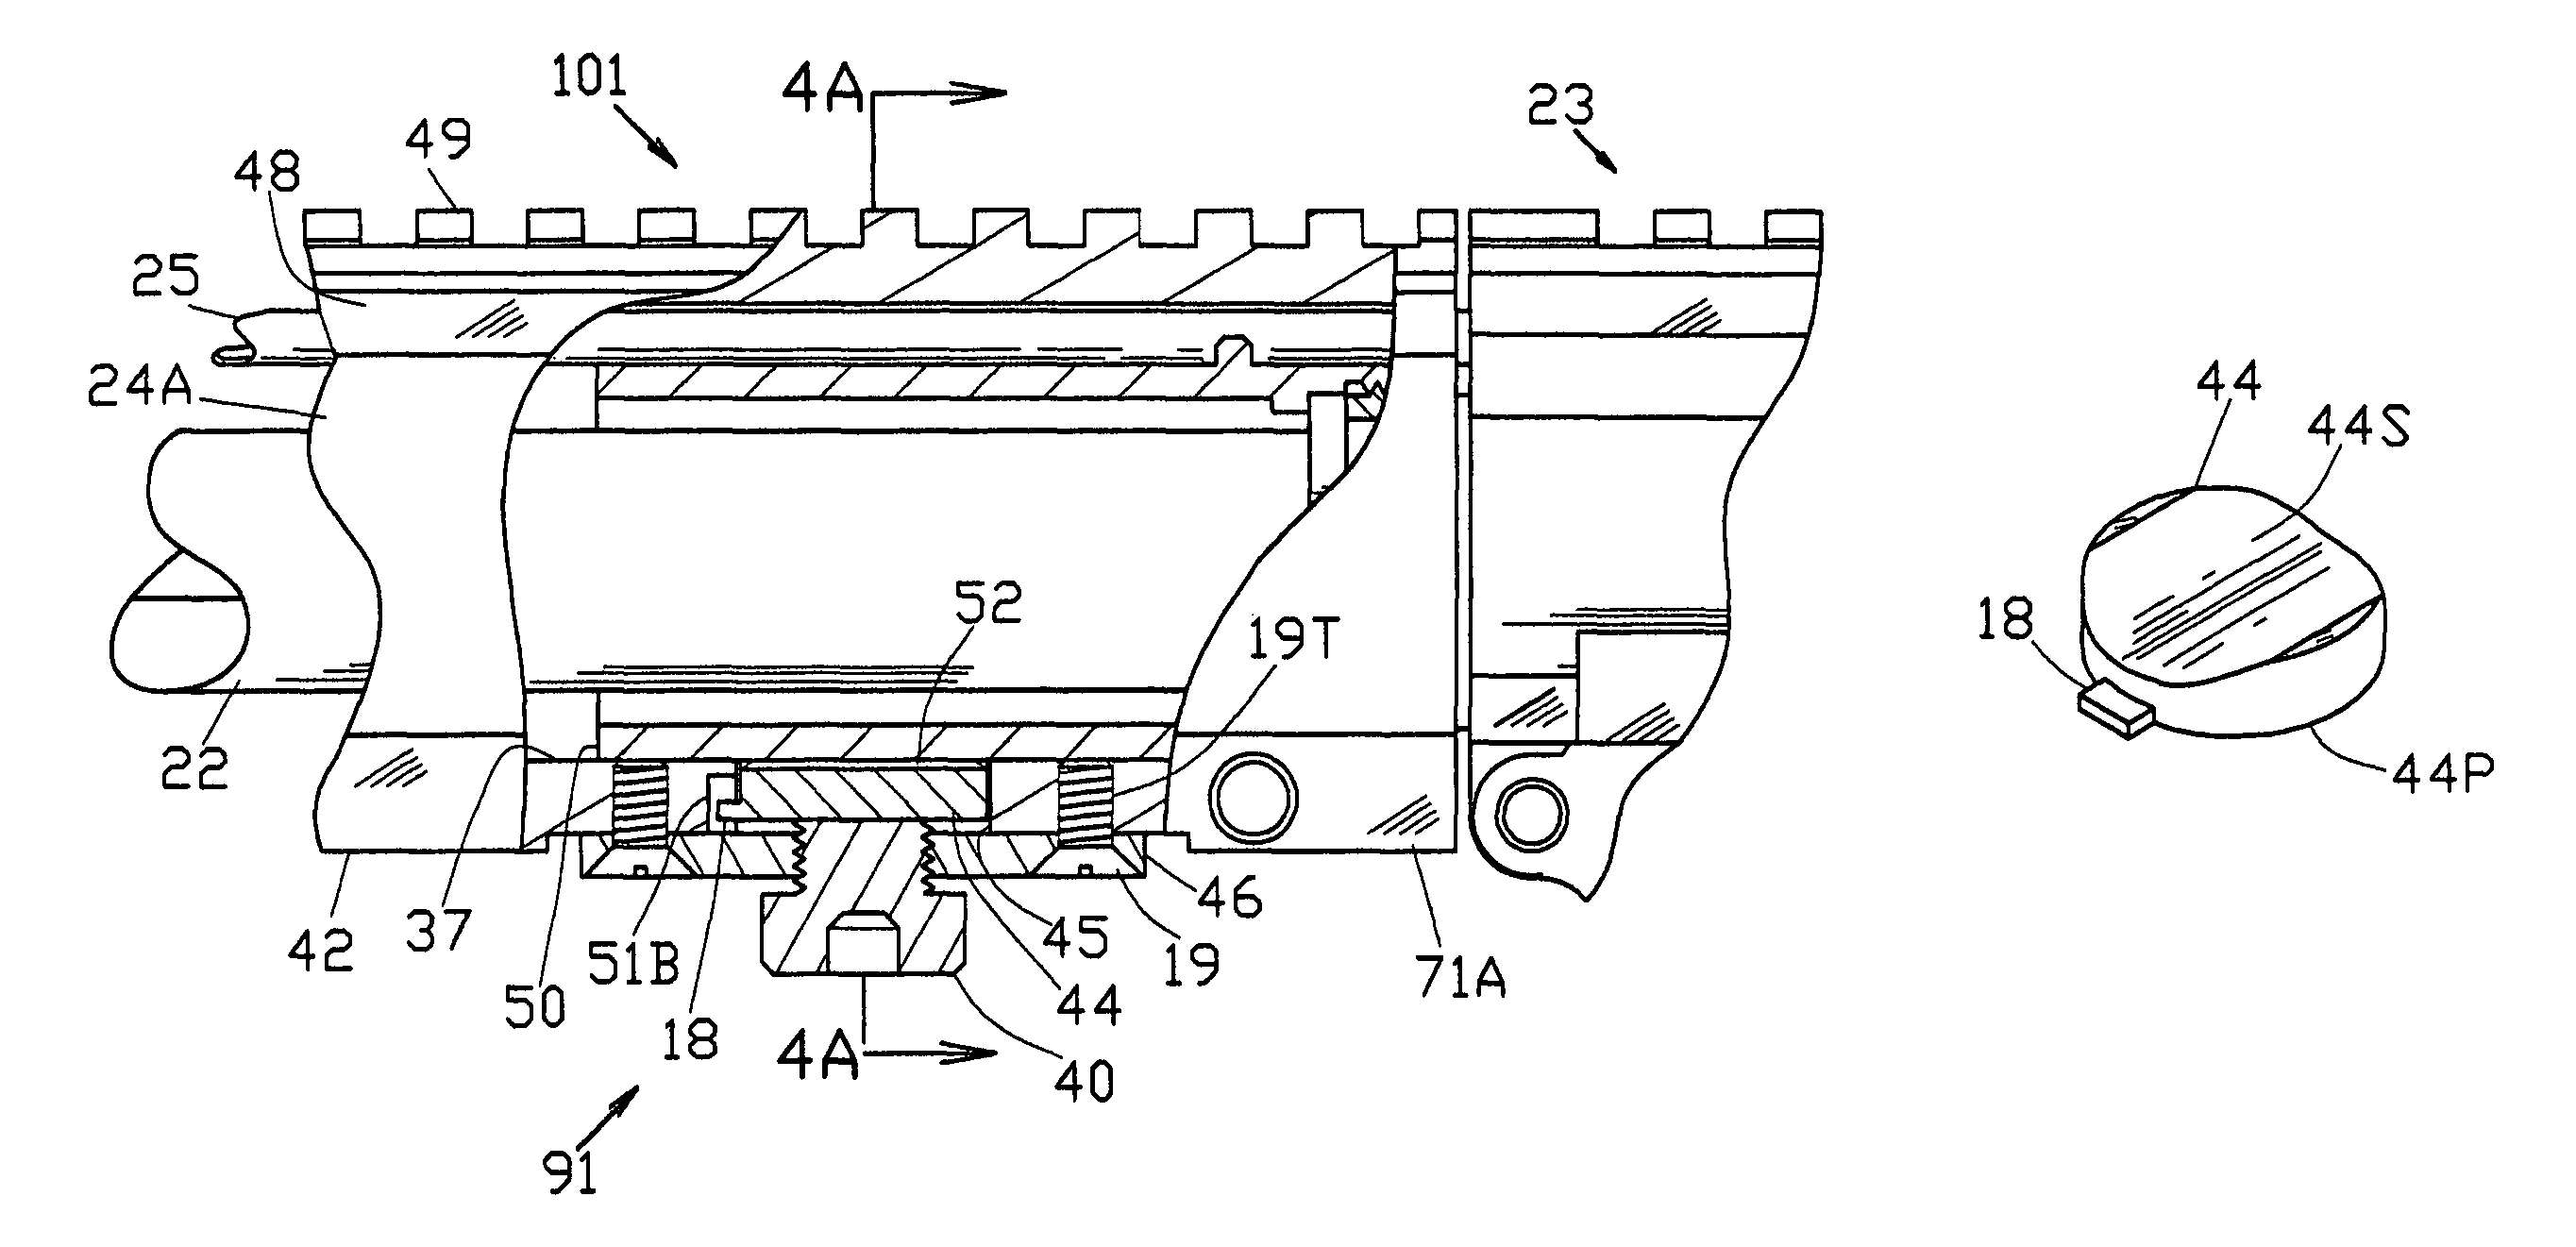 Handguard system with clamp device